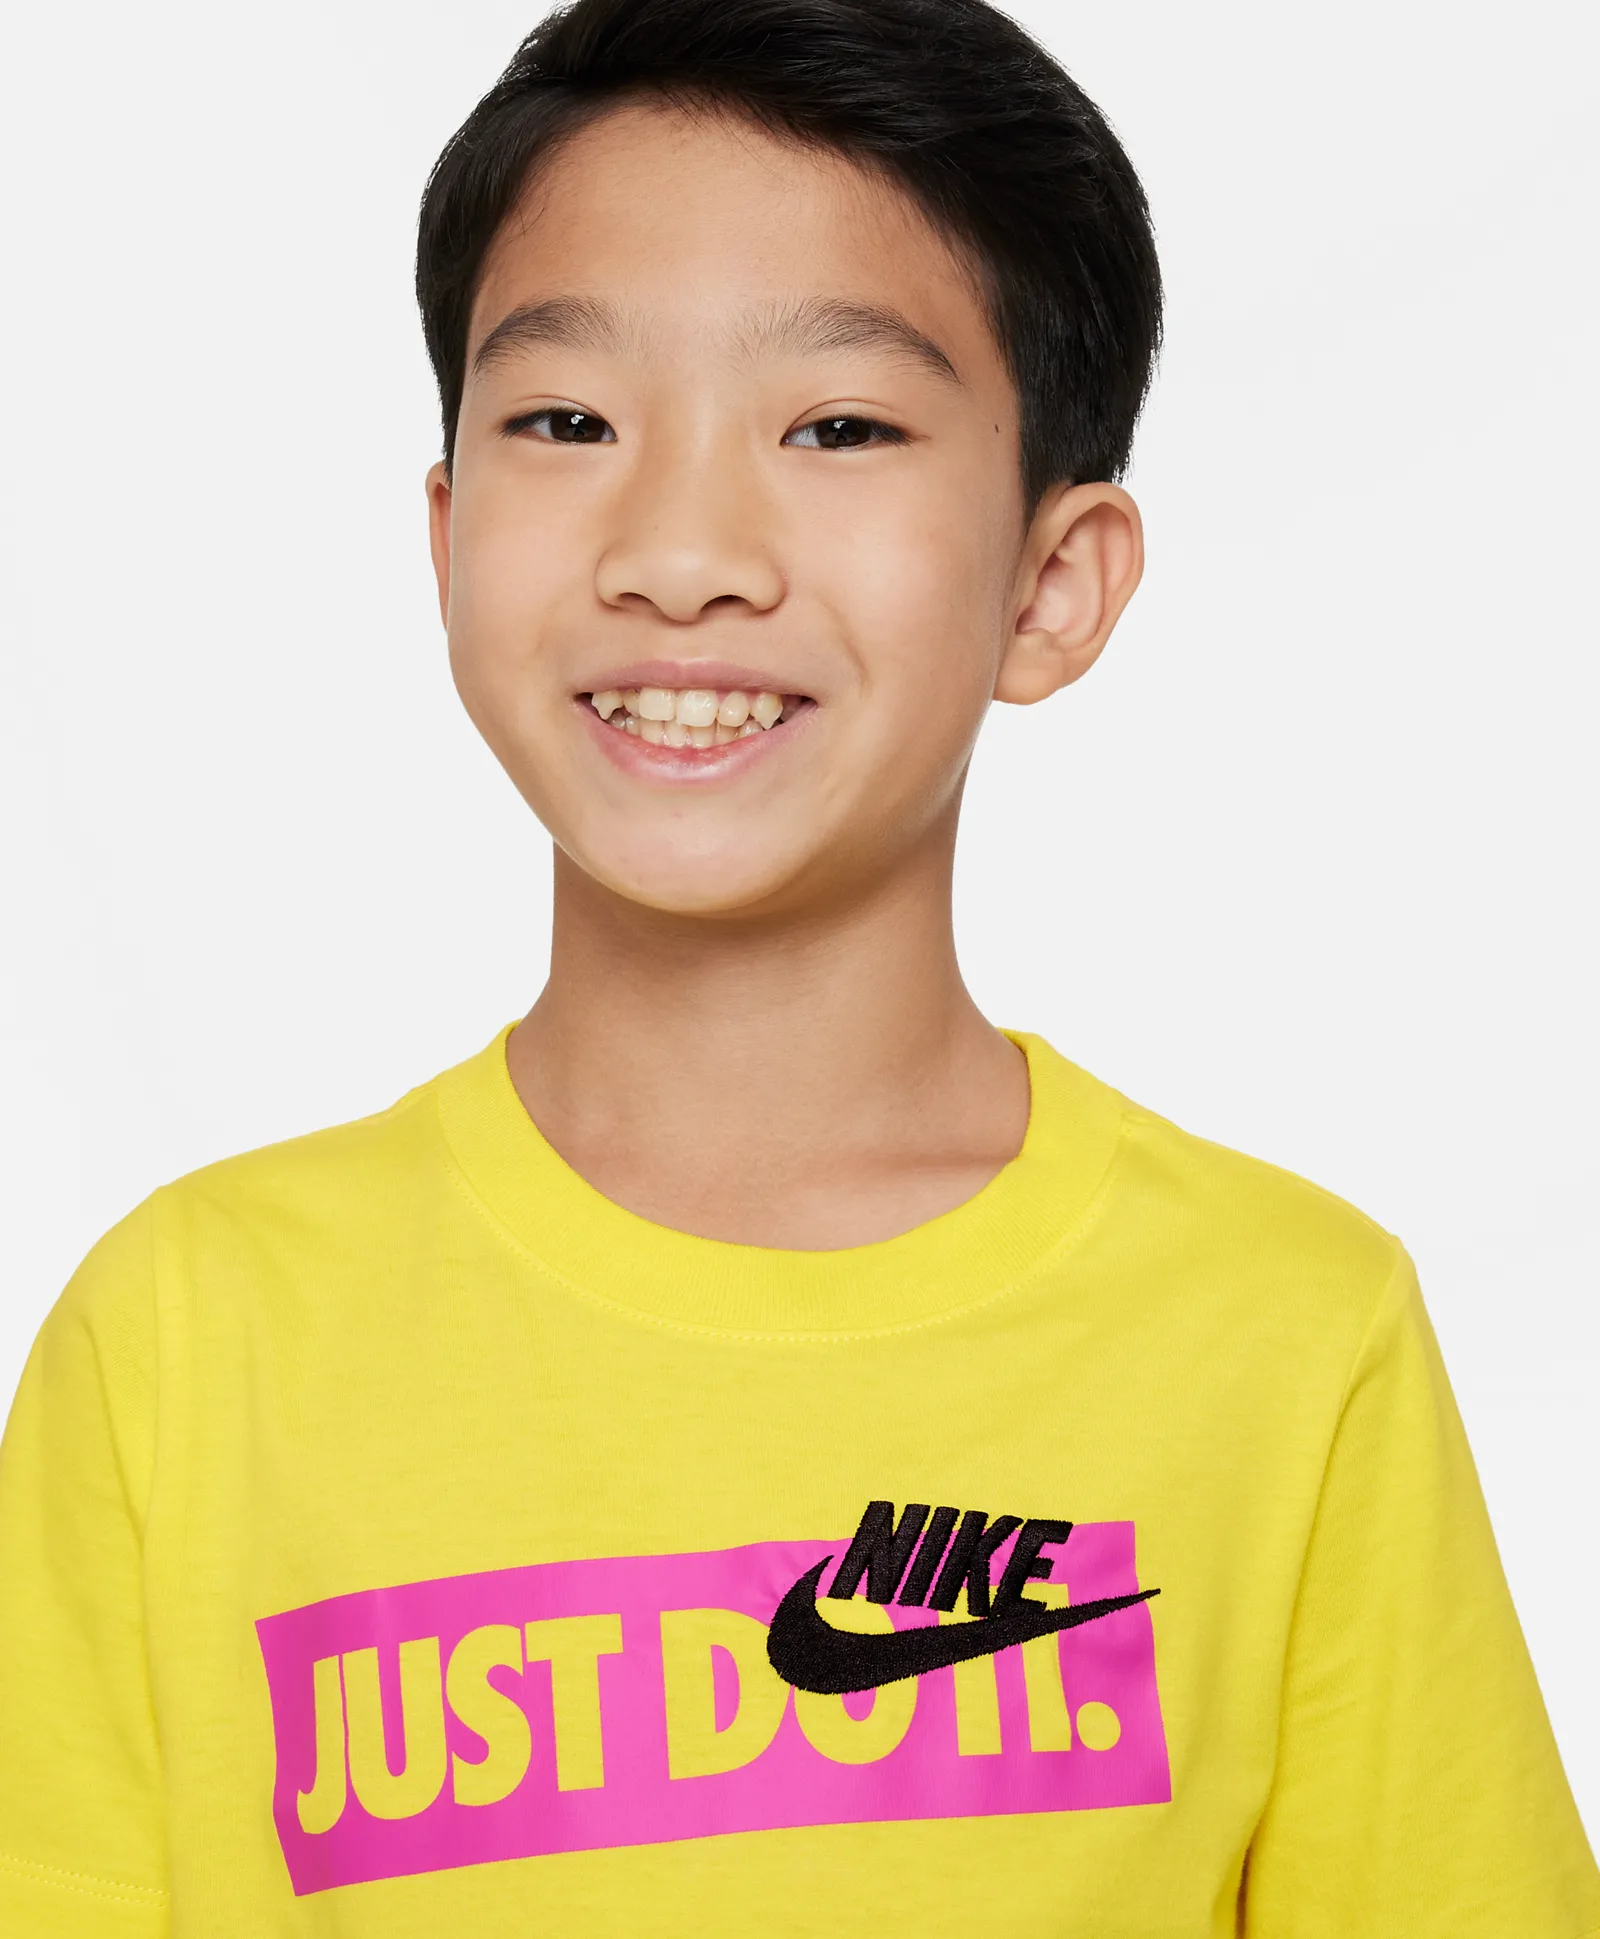 Nike Sportswear HBR Just Do It T-Shirt - Yellow Online in UAE, Buy at ...